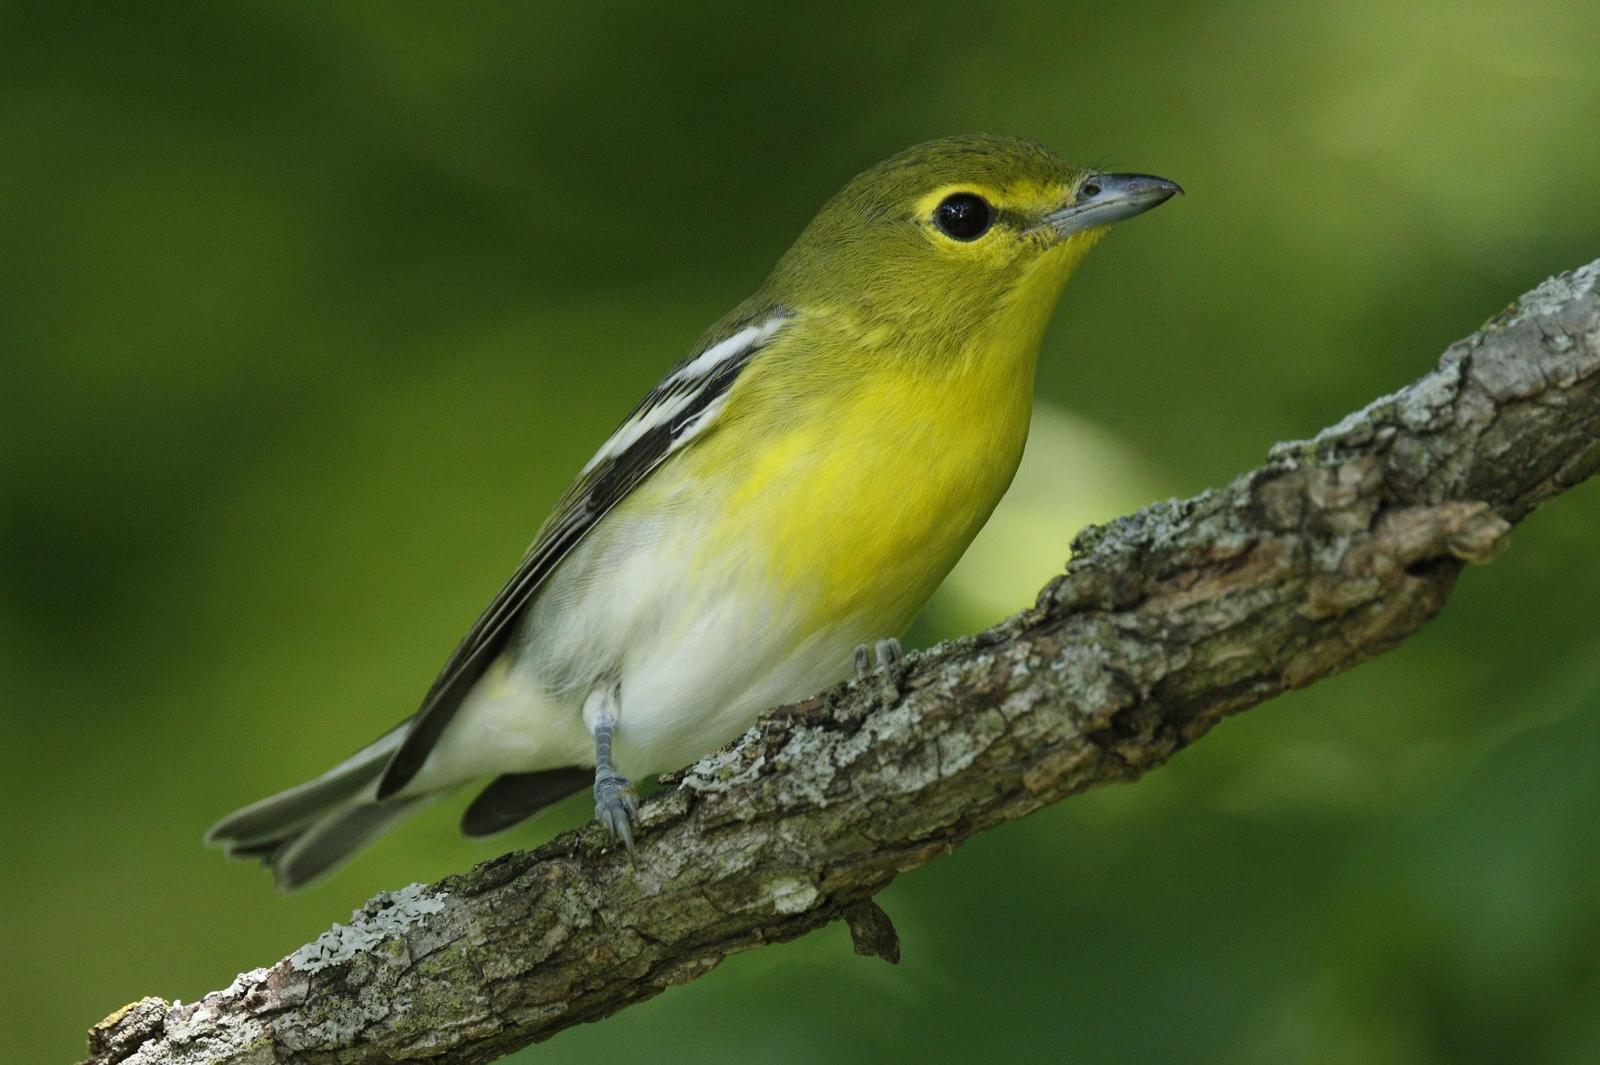 Yellow-throated Vireo Photo by Emily Willoughby